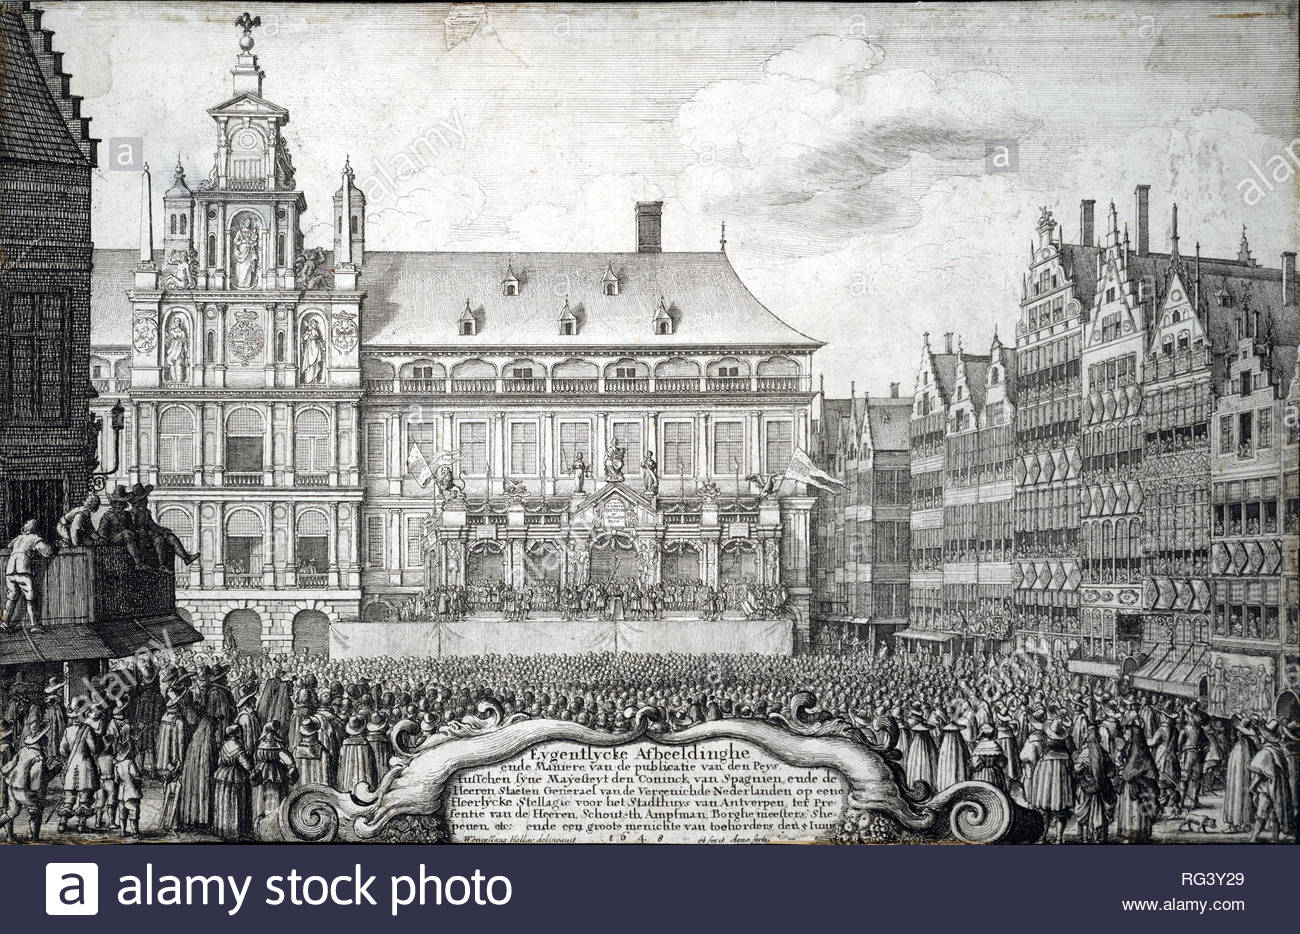 The Peace of Münster was a treaty between the Lords States General of the United Netherlands and the Spanish Crown, the terms of which were agreed on 30 January 1648. The Treaty is a key event in Dutch history marking formal recognition of the independent Dutch Republic and formed part of the Peace of Westphalia ending the Thirty Years' War and the Eighty Years' War. Etching by Bohemian etcher Wenceslaus Hollar from 1600s Stock Photo